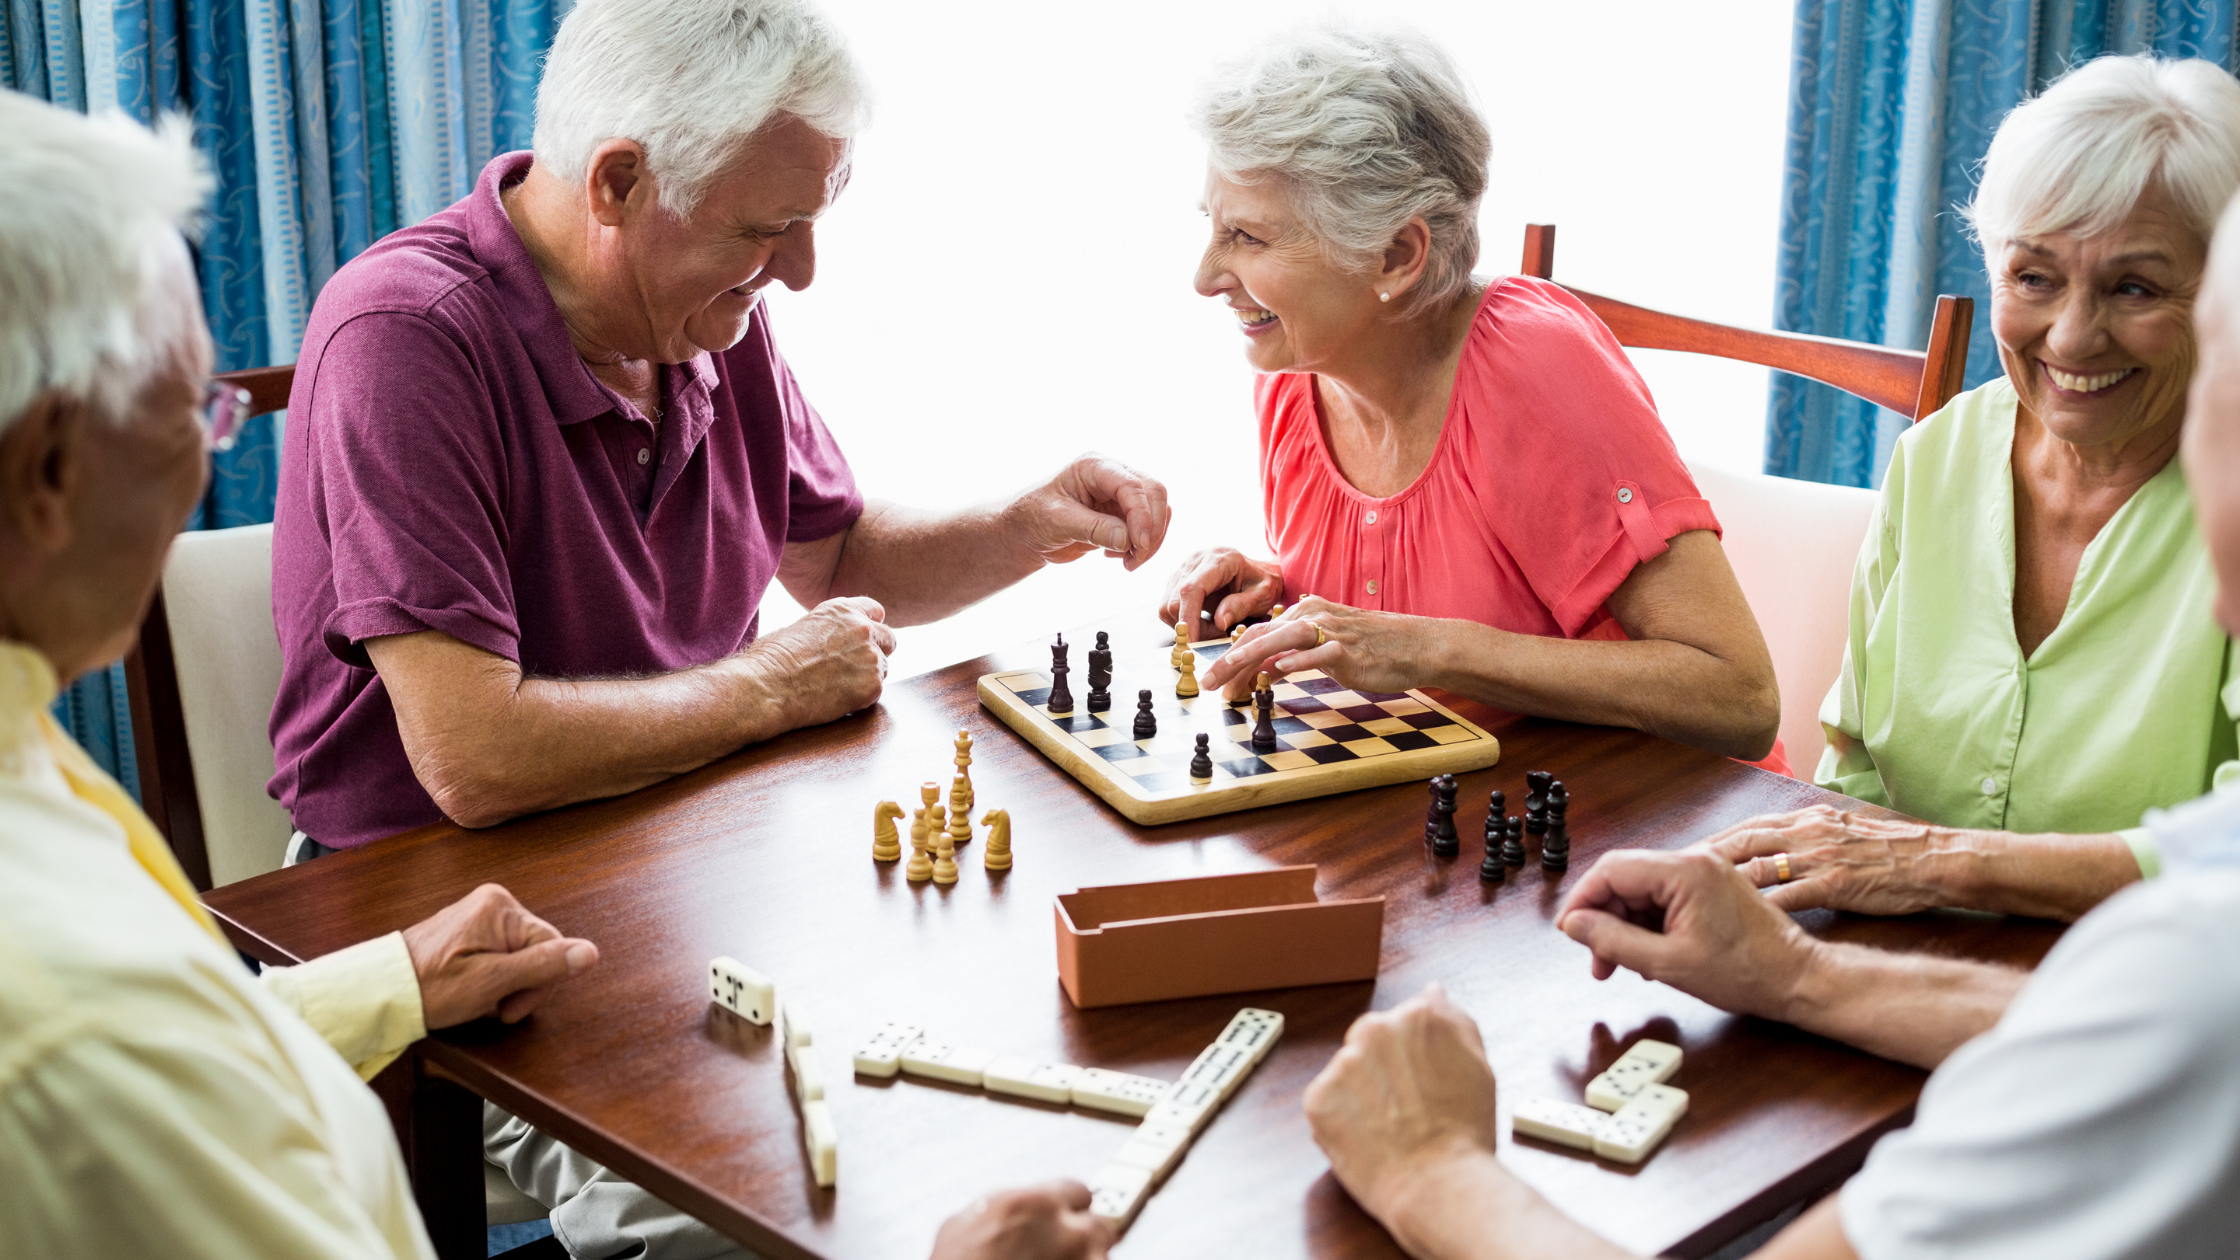 Increasing Socialization to Reduce Isolation and Loneliness in Aging